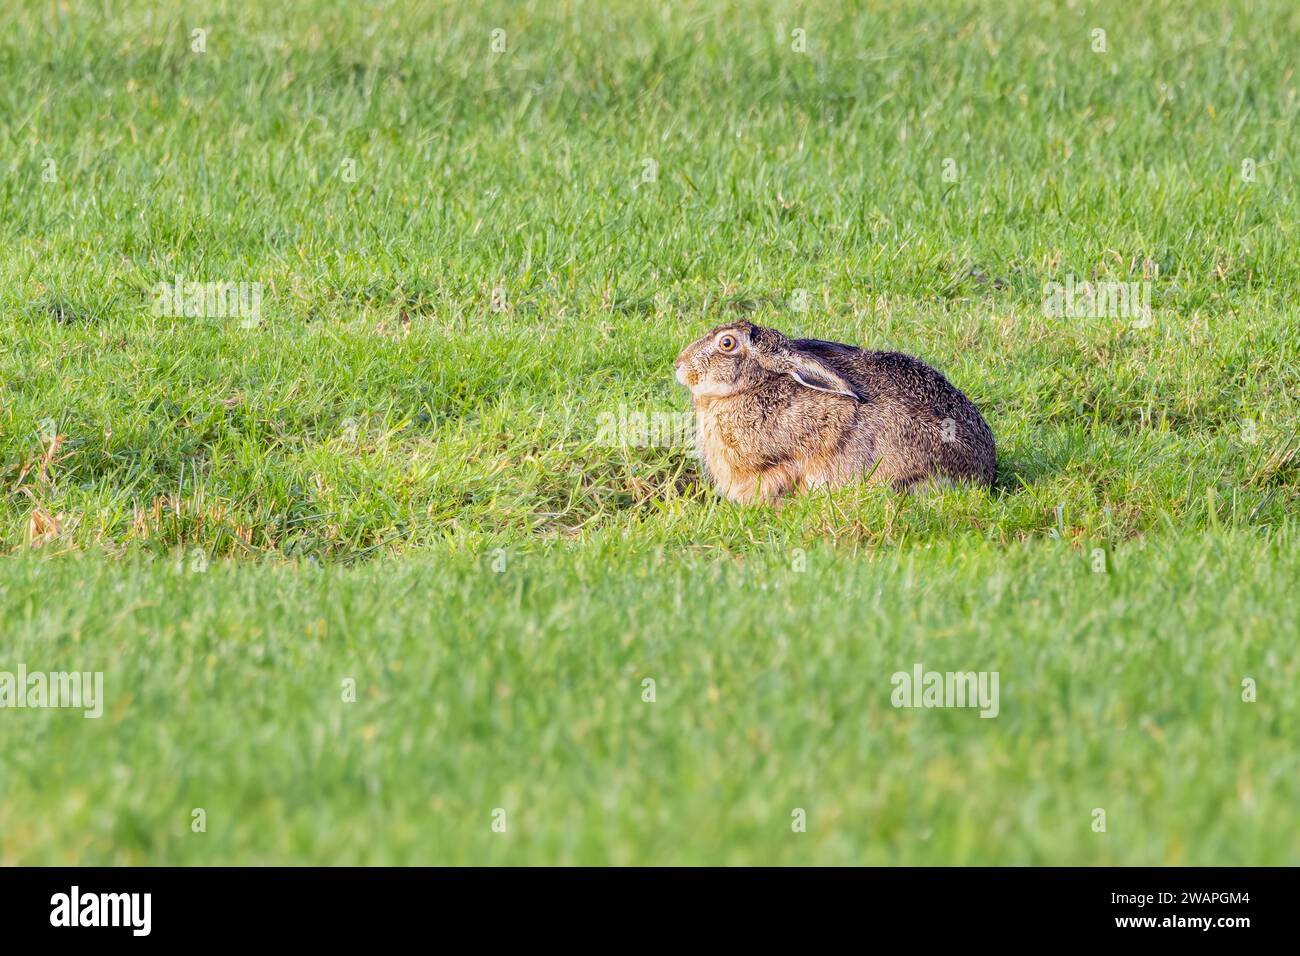 Close up of a hare or European hare, Lepus europaeus, foraging in natural habitat with bright eyes and attentive attitude Stock Photo